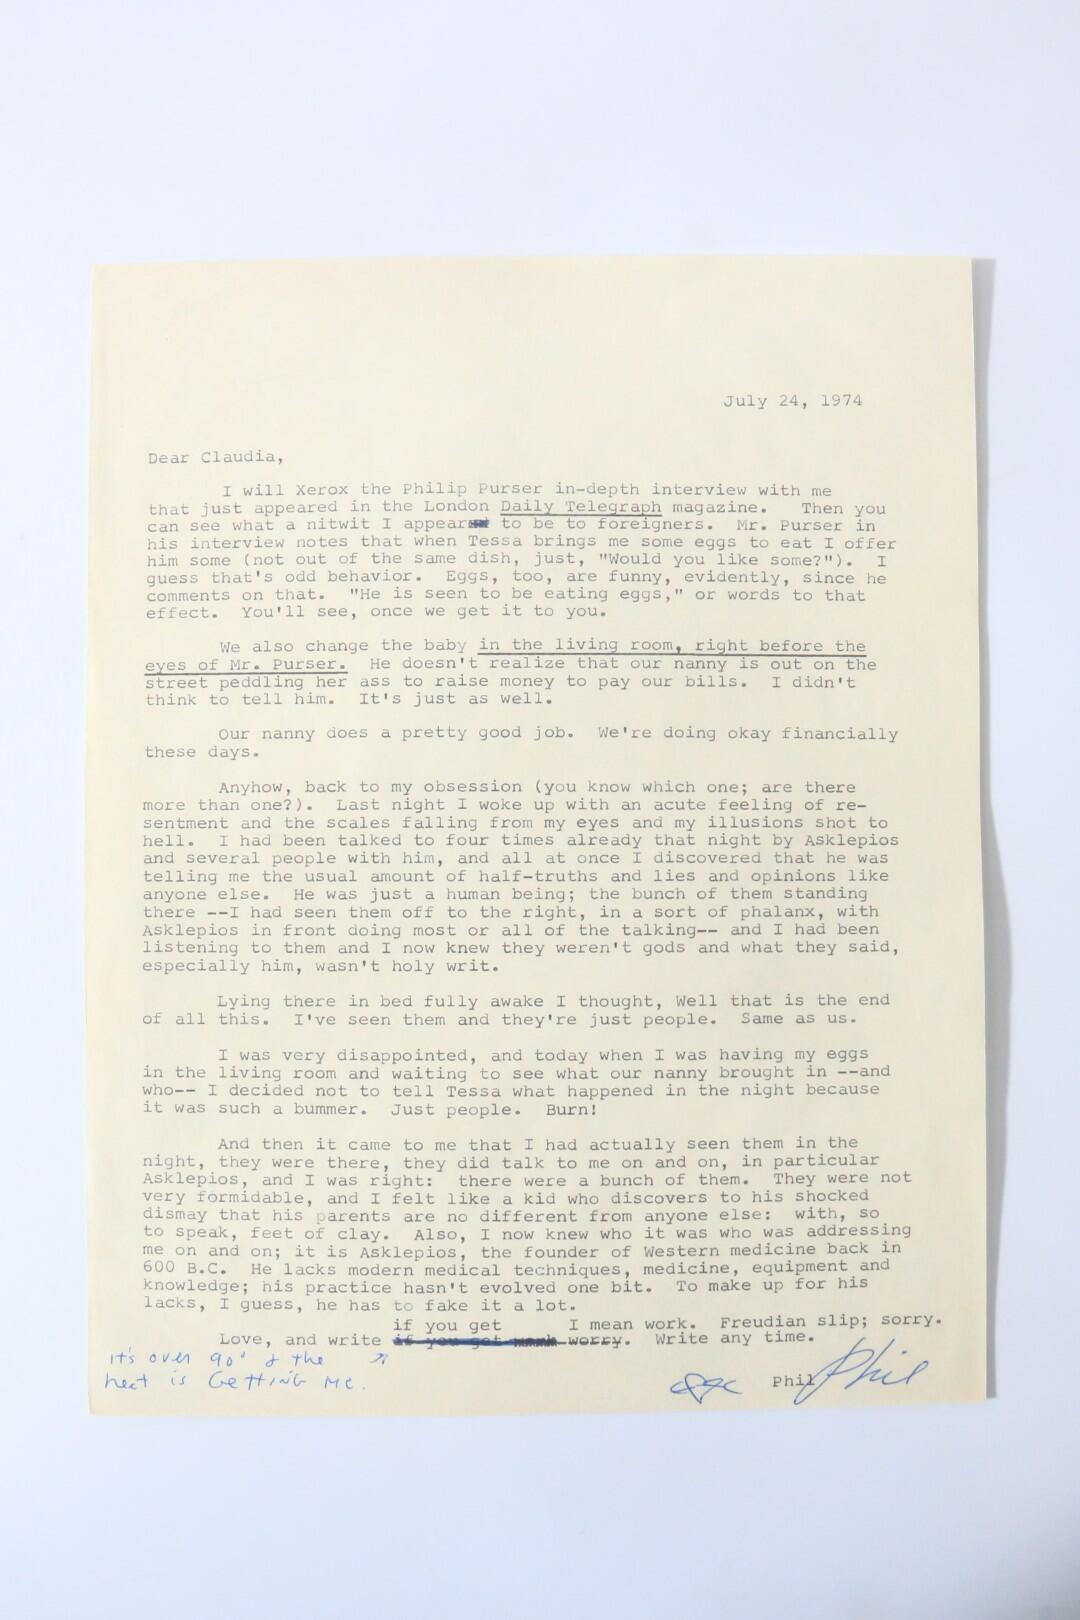 Philip K. Dick - Typed Letter Signed [TLS] to Claudia Bush - No Publisher, 1974, .